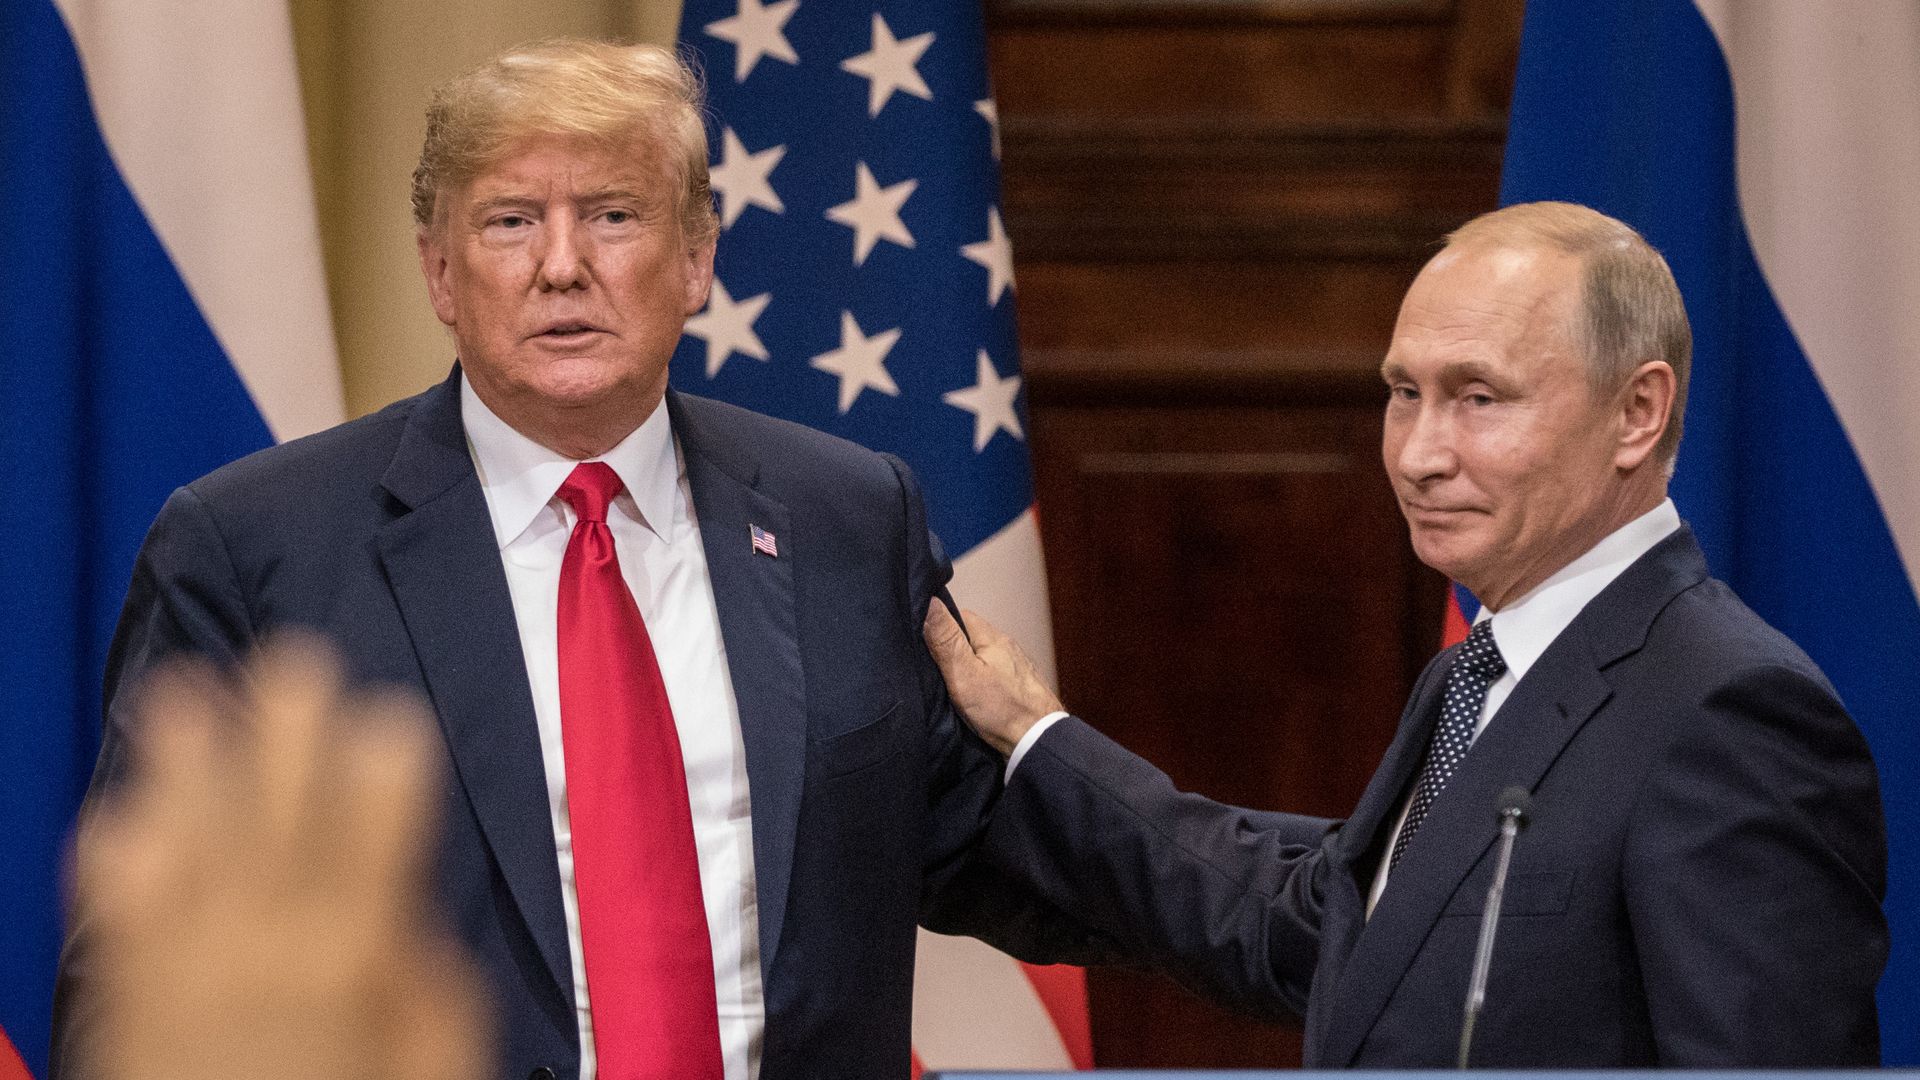 President Donald Trump and Russian President Vladimir Putin during a joint press conference after their July summit in Helsinki, Finland. Photo: Chris McGrath/Getty Images